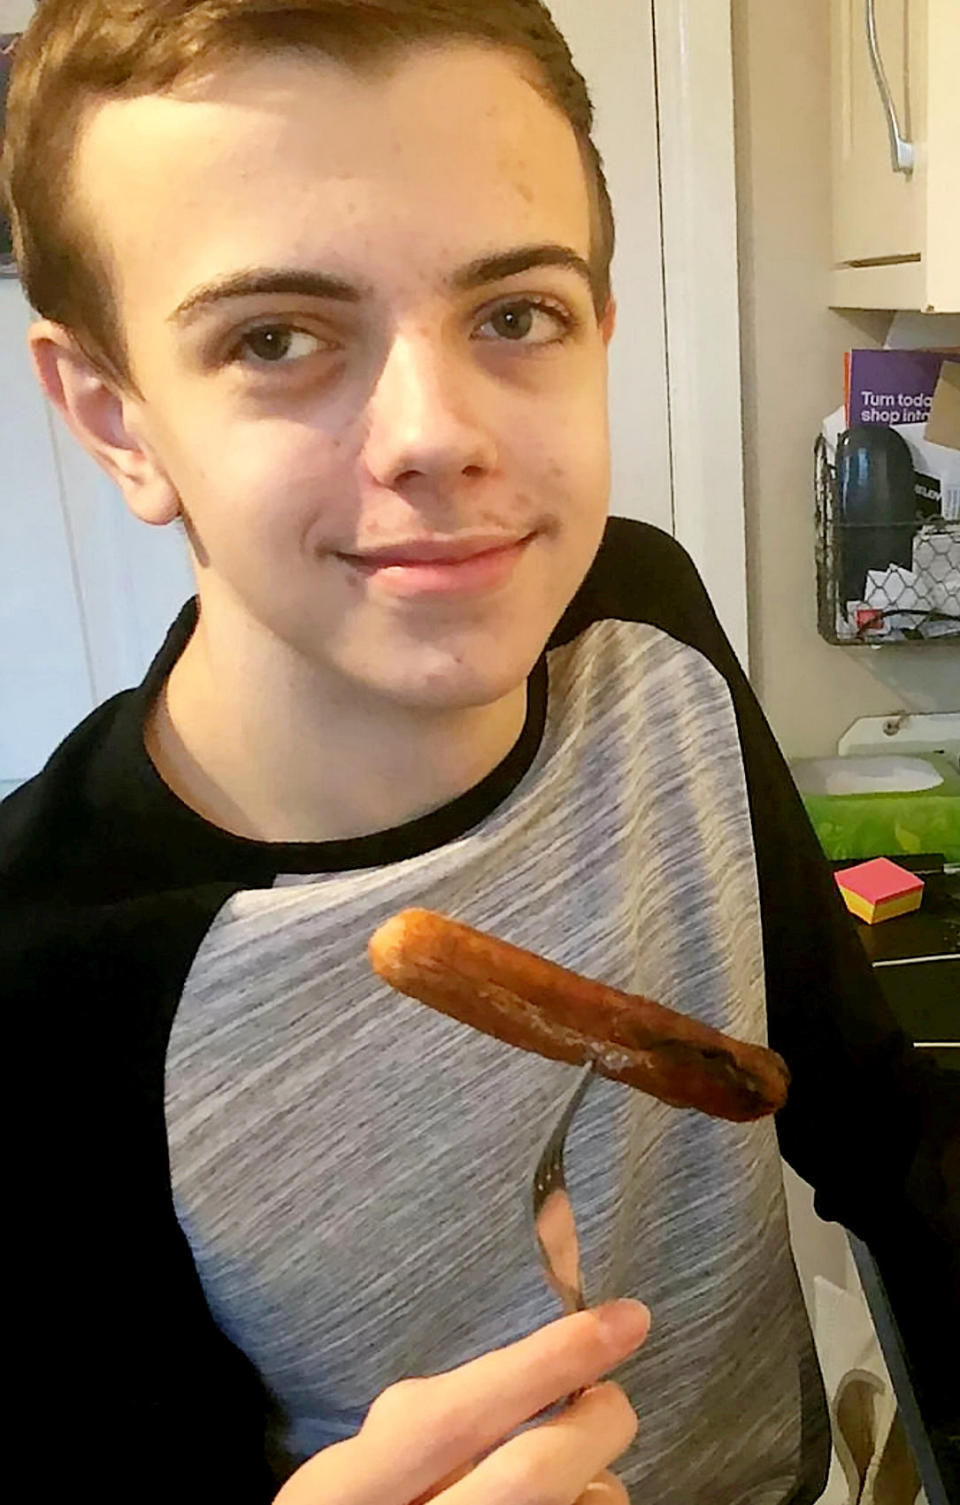 A teenage boy who has eaten nothing but SAUSAGES every mealtime for his entire life has been cured of his bizarre food phobia after being hypnotised over Facetime. Ben Simpson, 15, would refuse to try anything other than a bland diet of plain Richmonds bangers washed down with glasses of water. He developed his fear of food, known as ARFID, when mum Wendy Hughes, 55, tried to move him onto solid foods as a baby. She has since forked out £60 a month on Richmonds skinless sausages - with Ben getting through four every meal and several packs of 16 each week. Frustrated Wendy became so concerned about her son’s health she turned to Cognitive Behavioural Hypnotherapist David Kilmurry for help. And she was left amazed after Ben began trying new foods for the first rime following just one hypnotherapy session on a Facetime phone call.